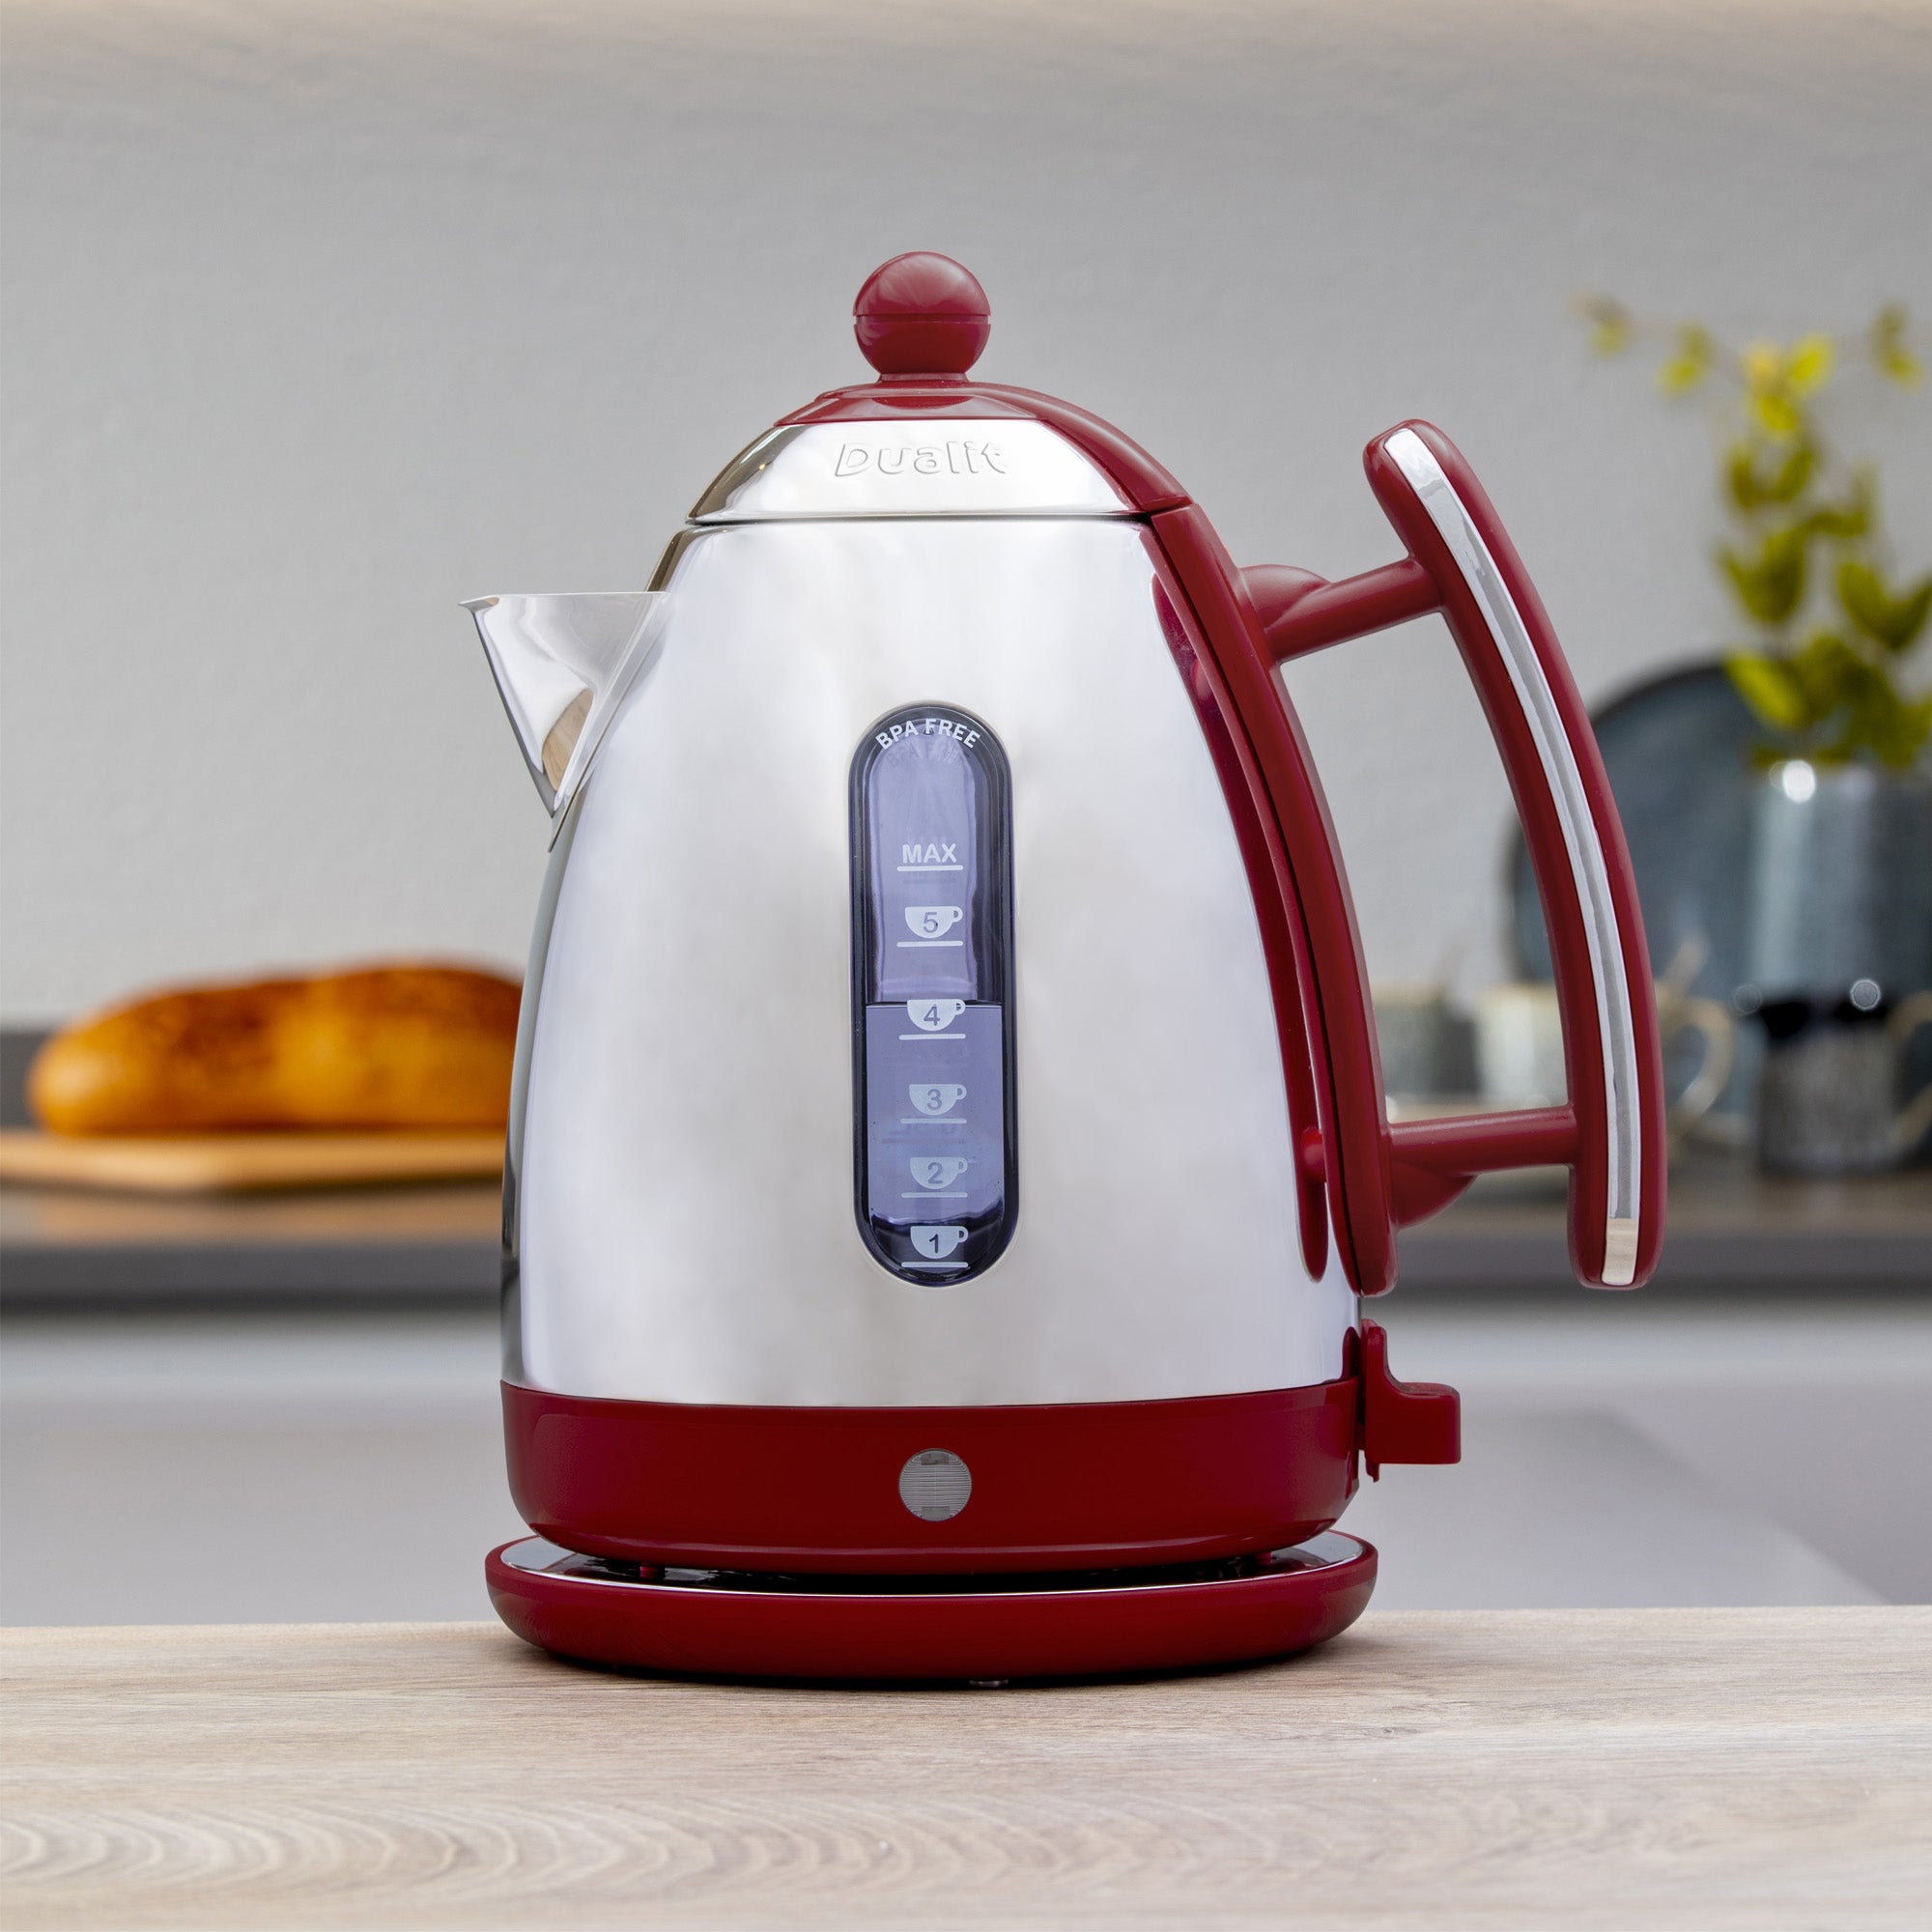 Dualit Lite 15l Kettle Red